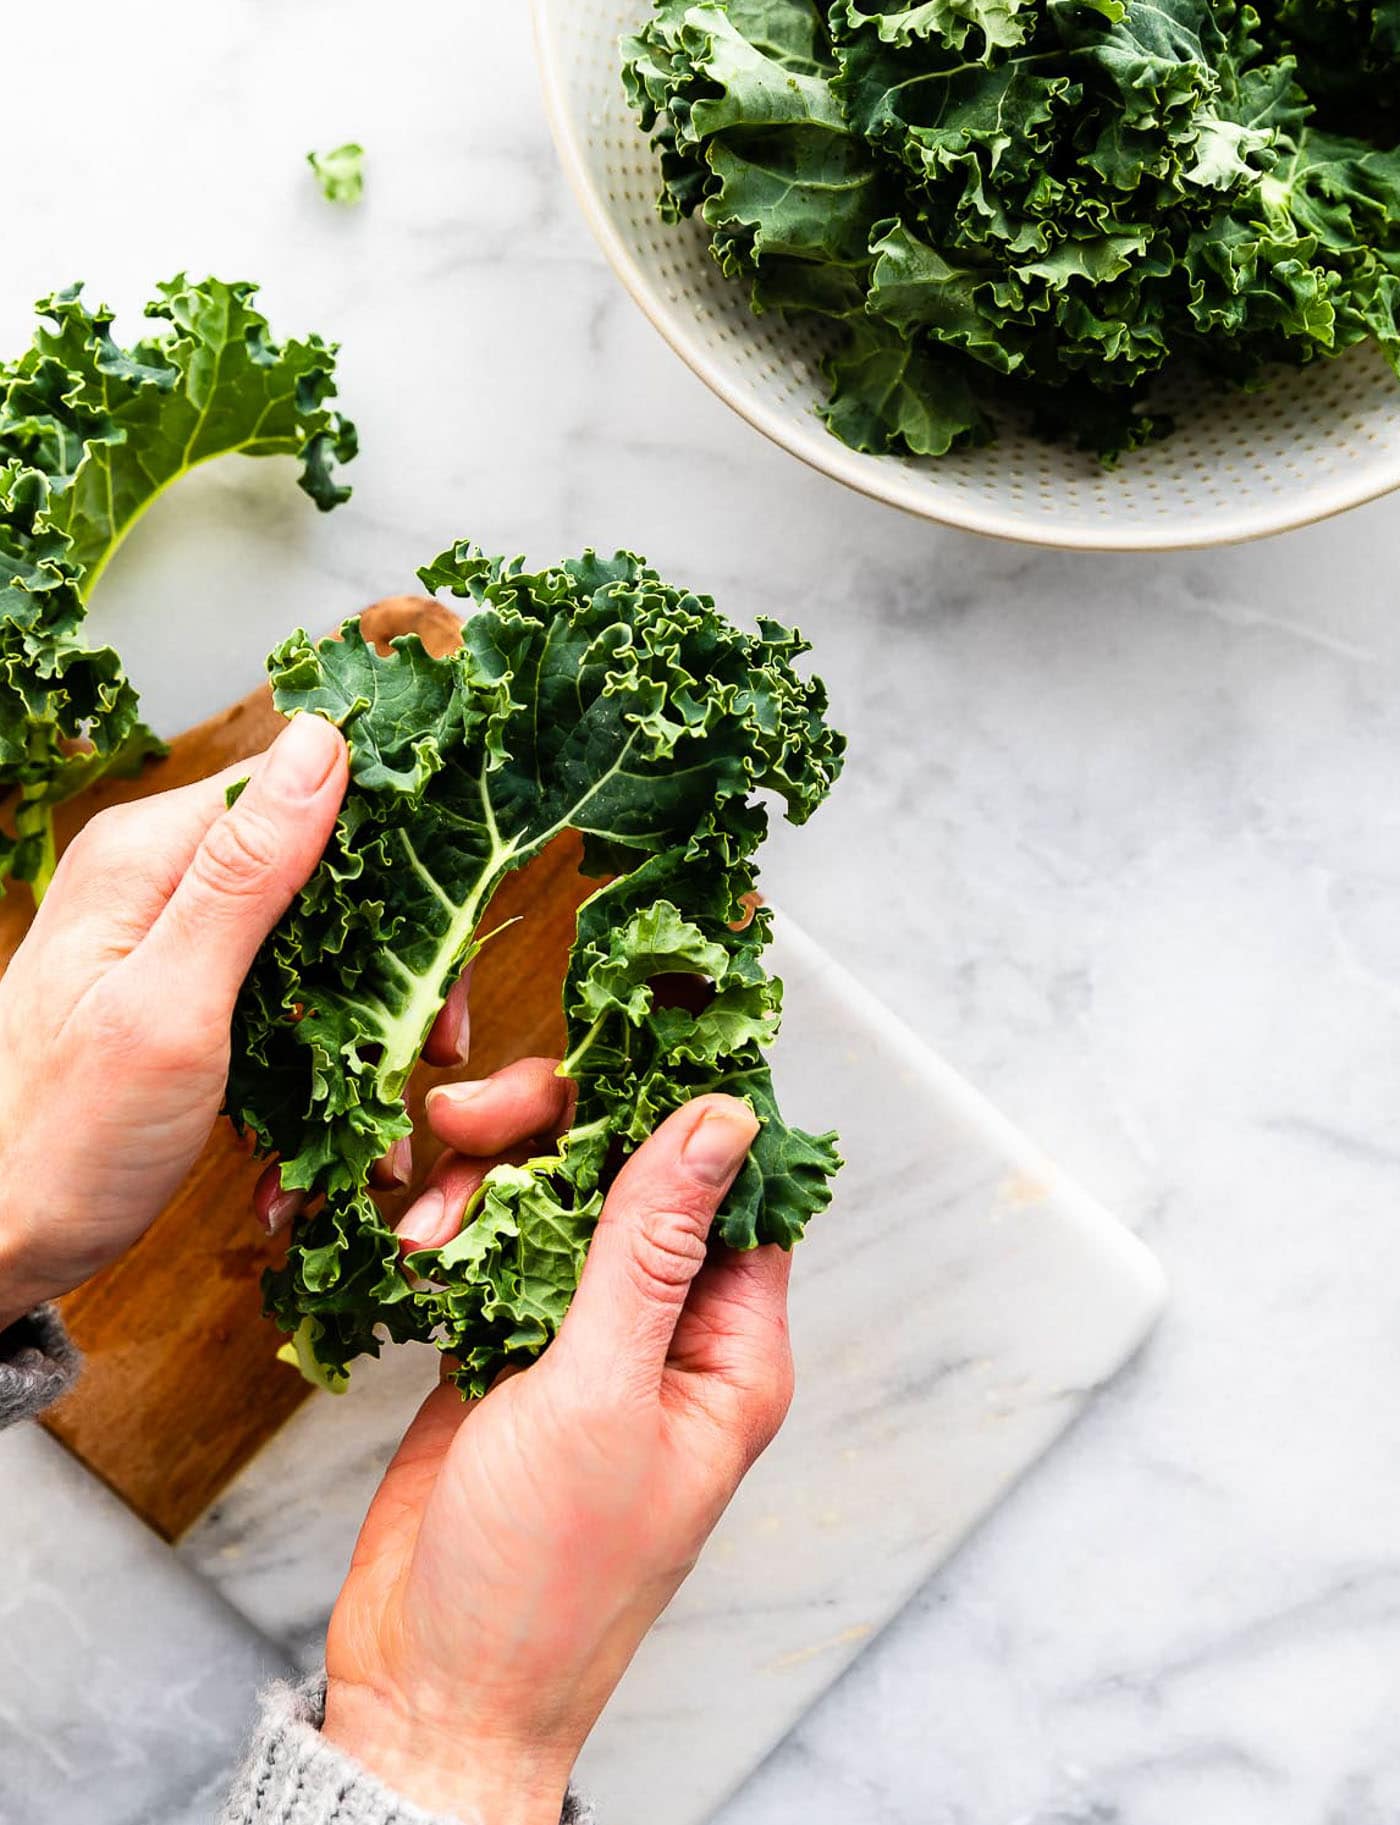 a woman's hands pulling kale leaves off a rib of kale